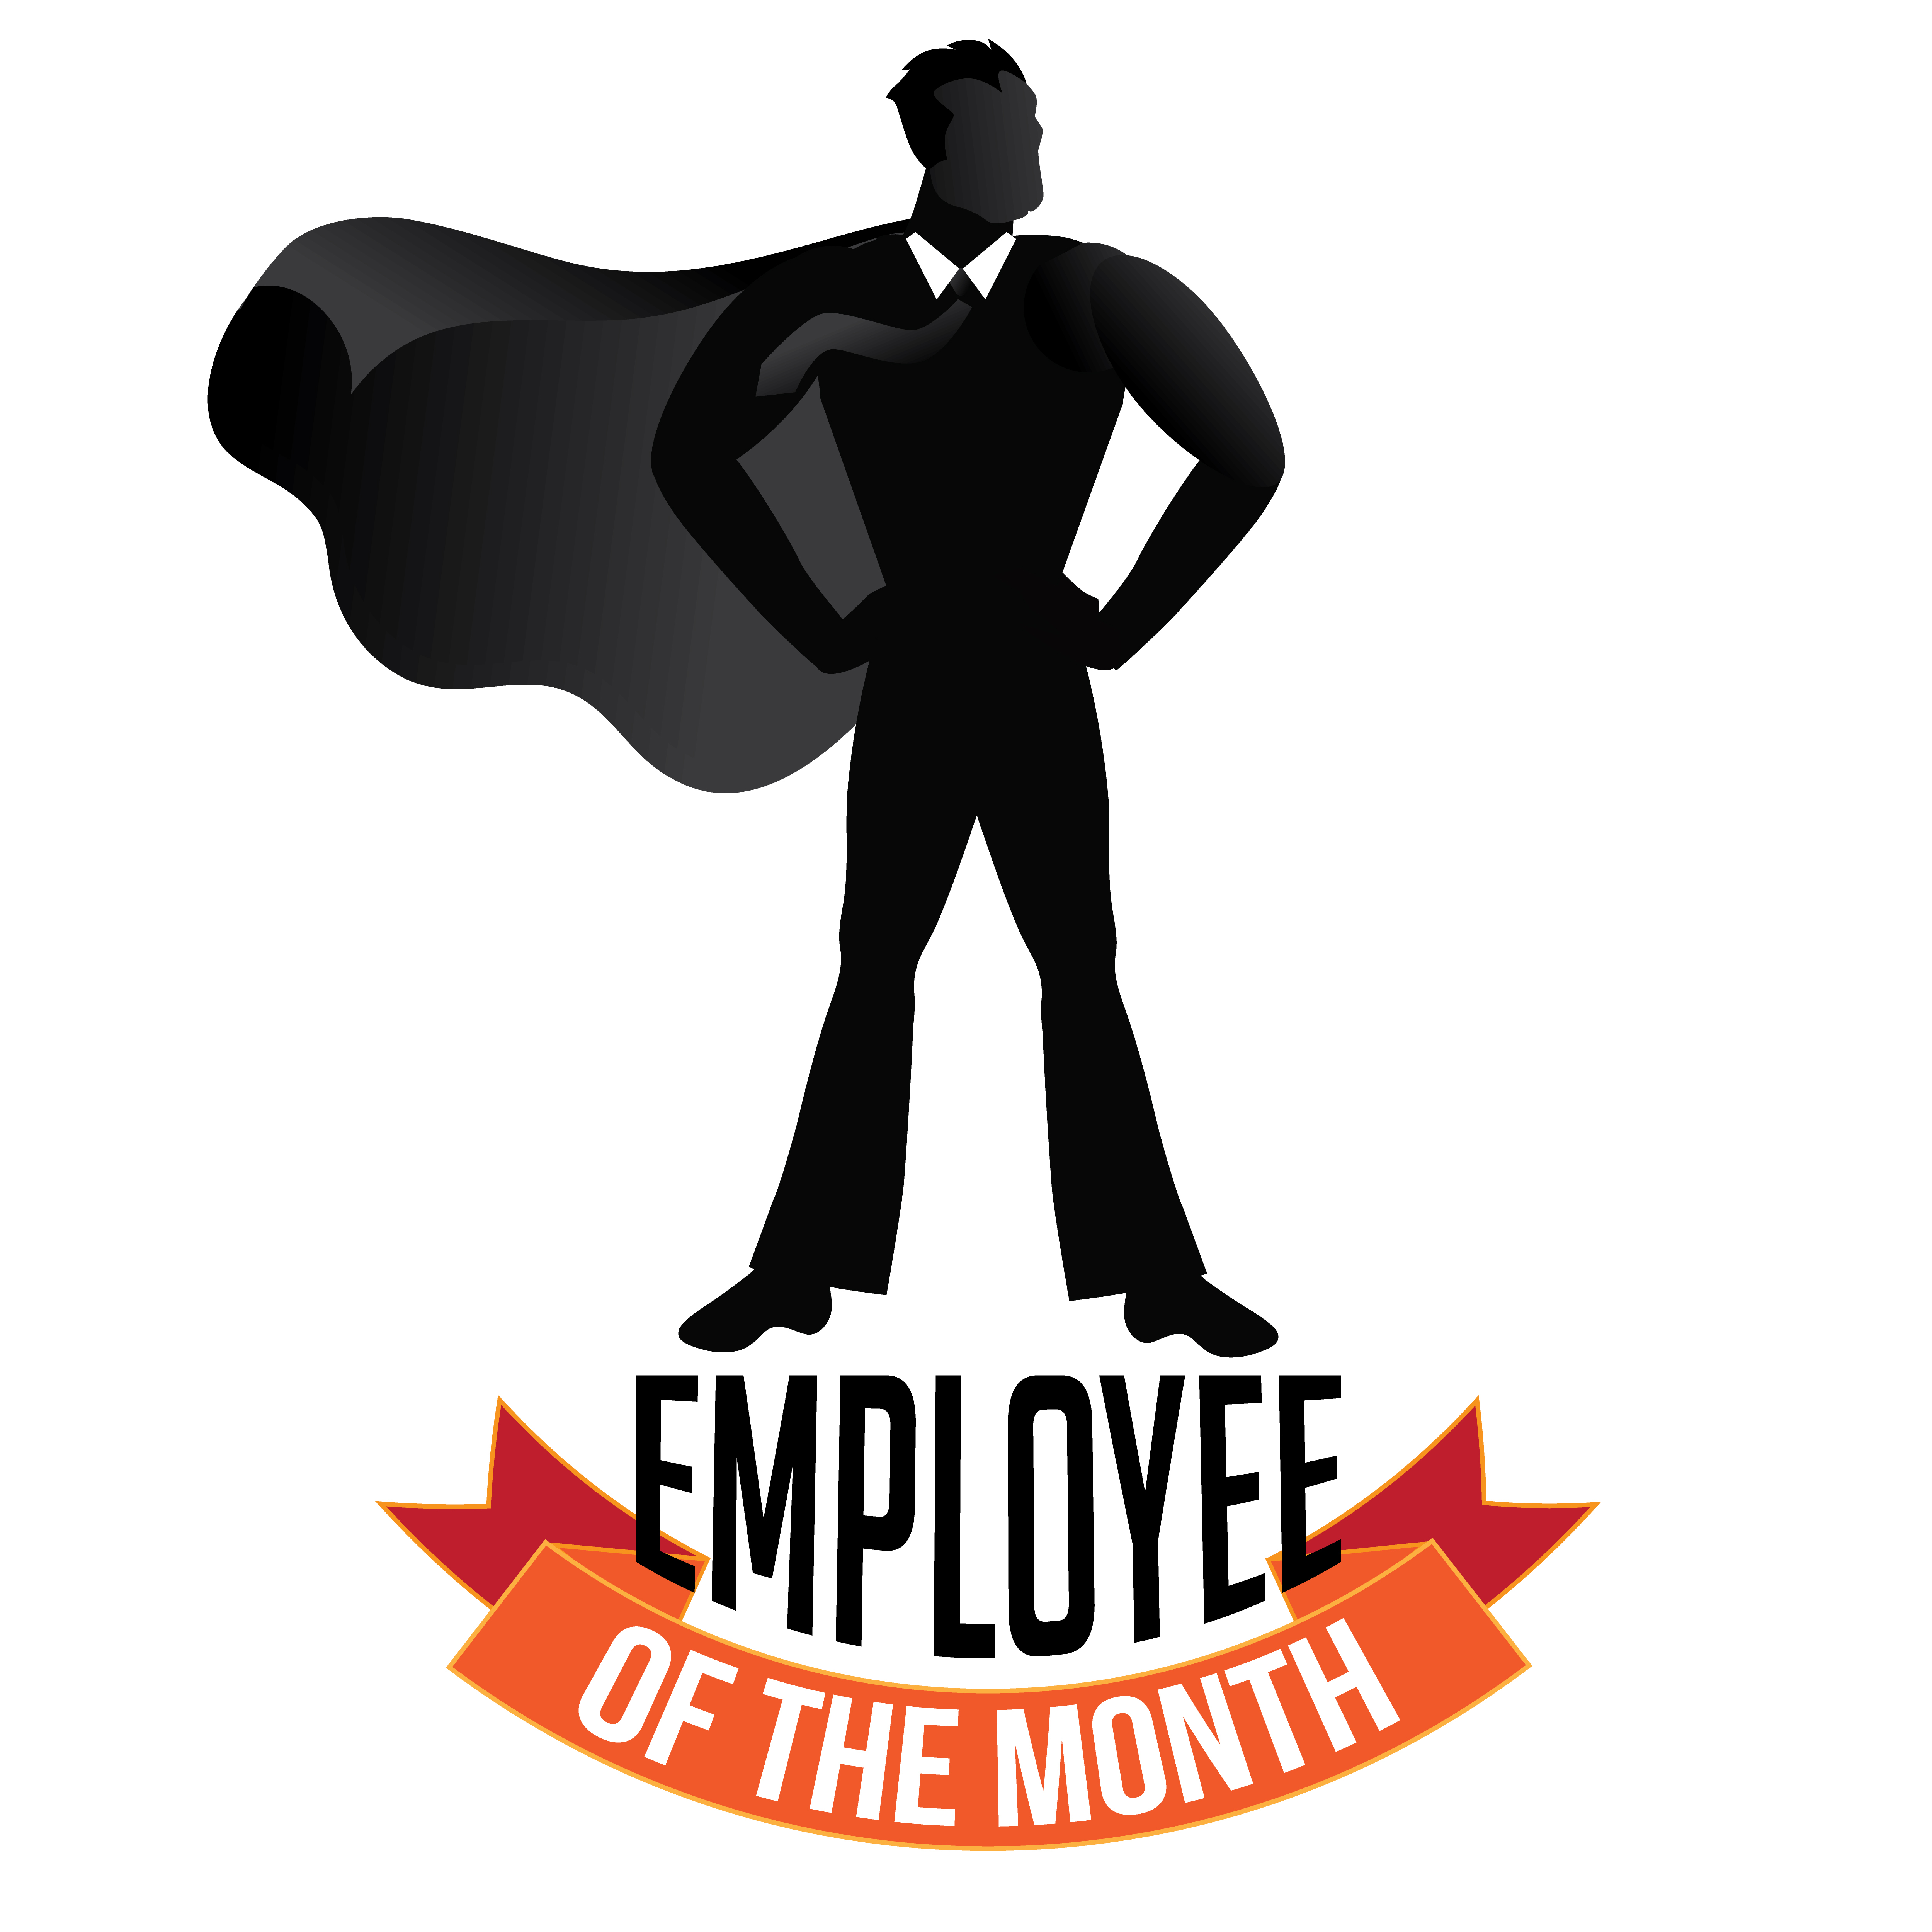 Congratulations to our June 2018 Employee of the Month!